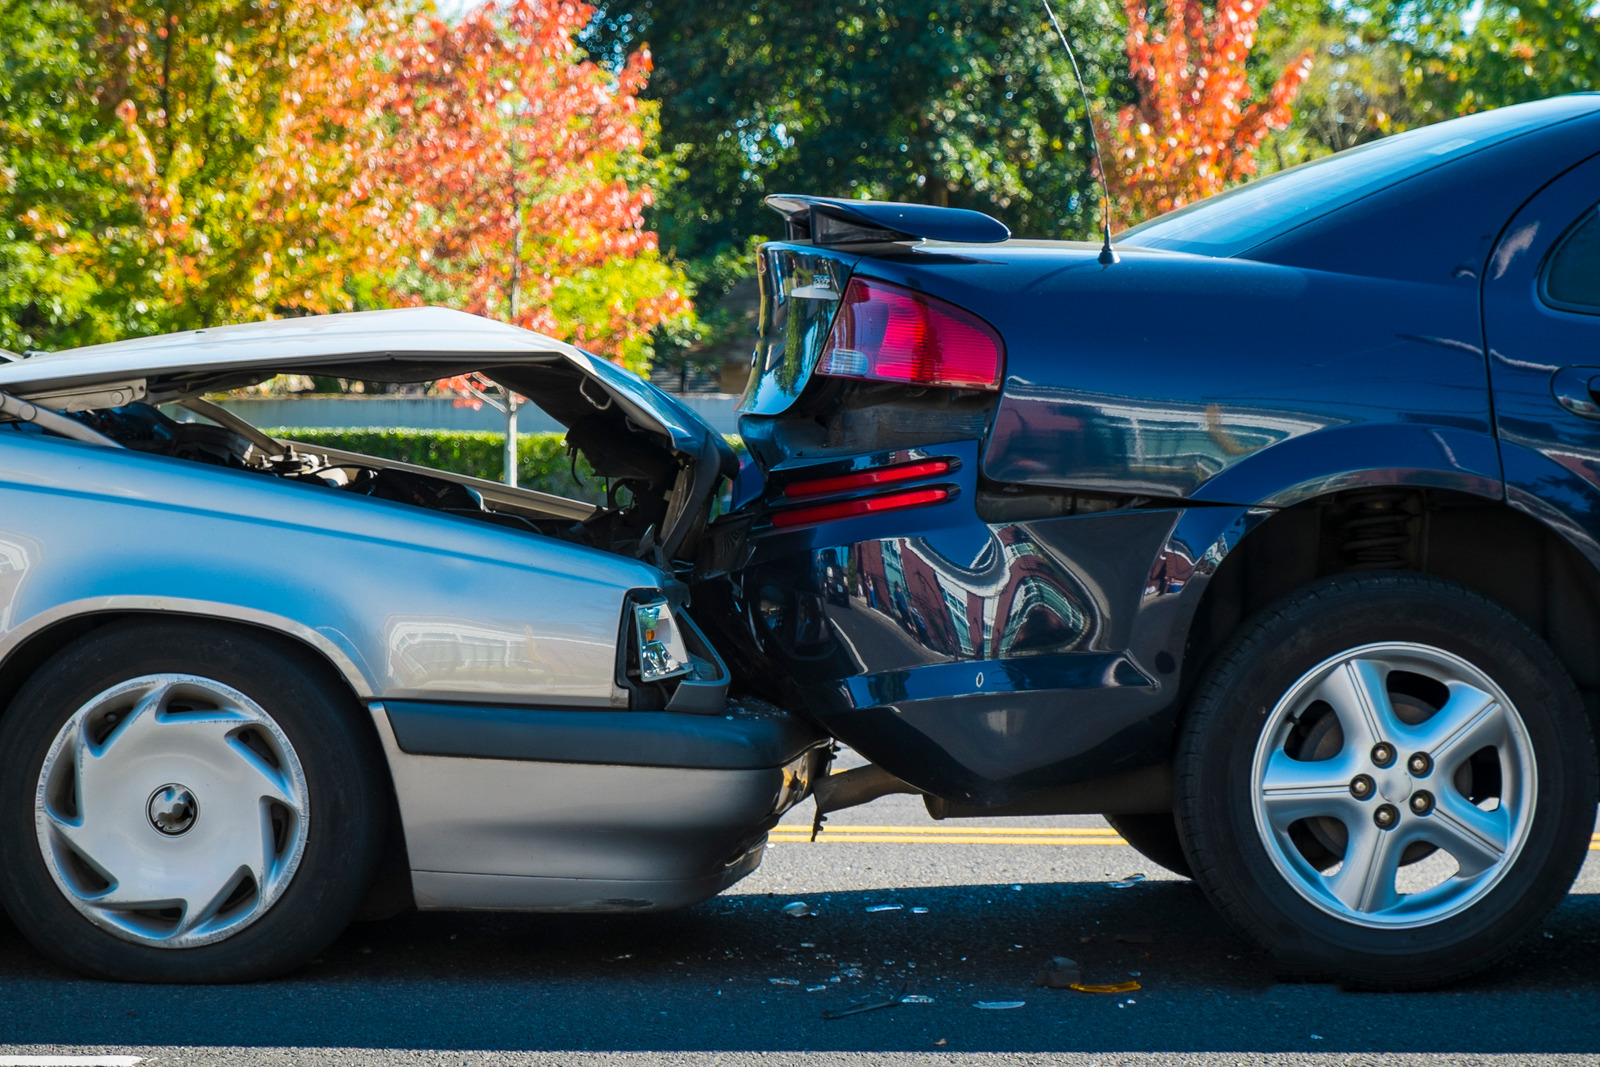 Infographic Explains How Long Your Car Accident Settlement Could Take